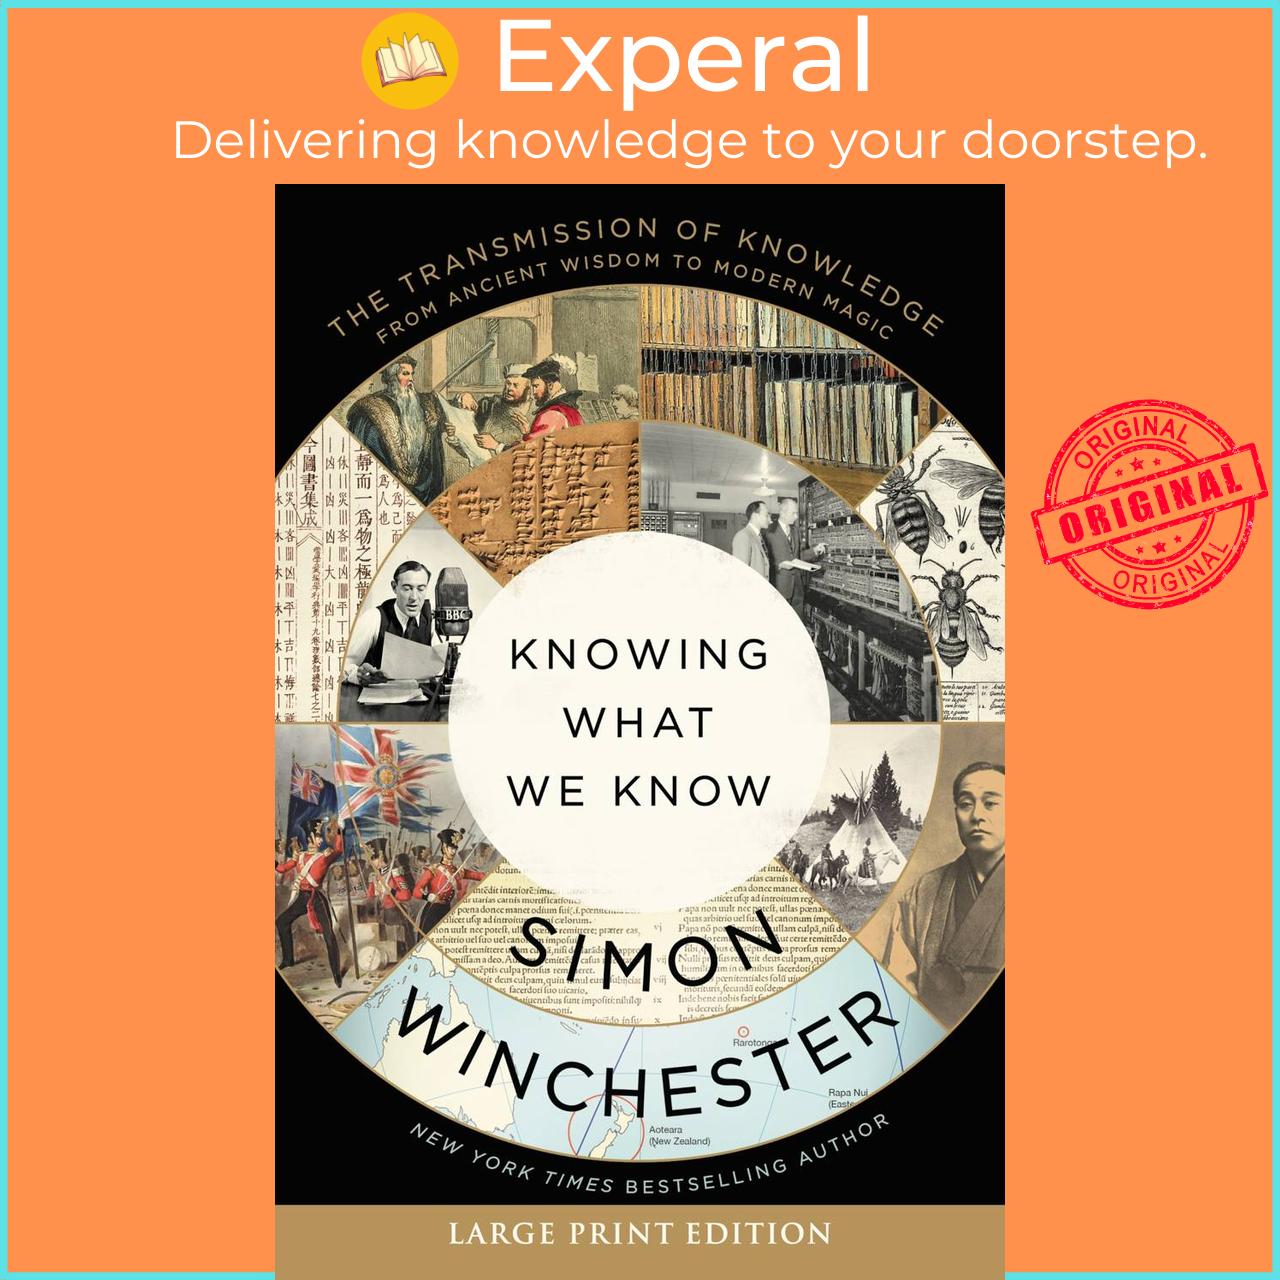 Sách - Knowing What We Know - The Transmission of Knowledge: From Ancient Wisdom to Mode by Simon Winchester (paperback)